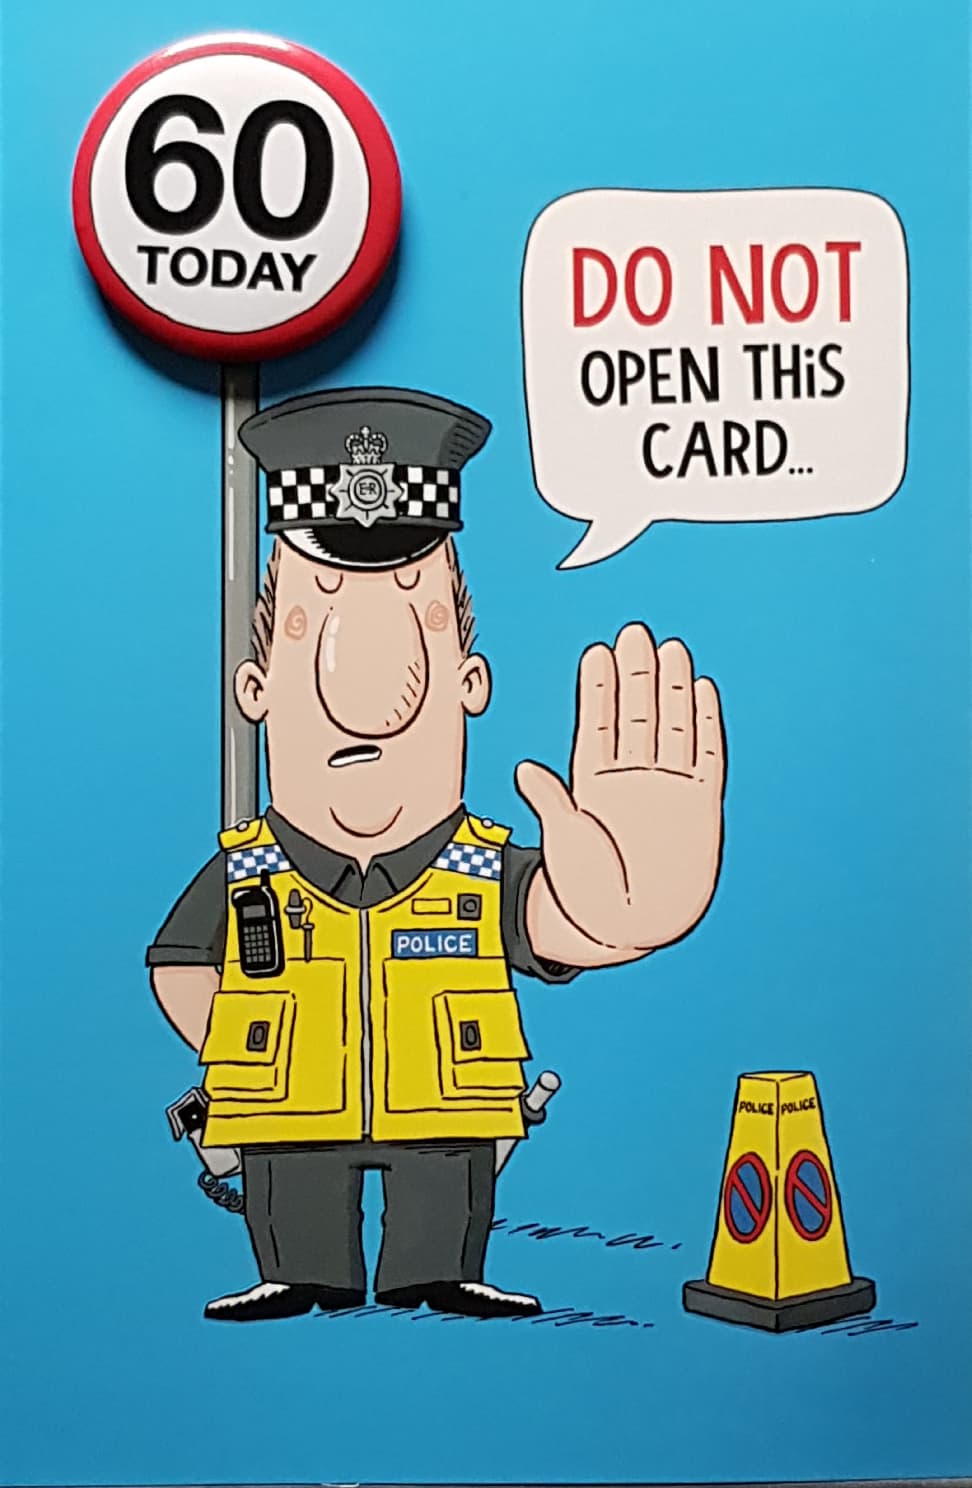 Age 60 Birthday Card - A Policeman In Yellow Jacket & A Badge '60 Today'